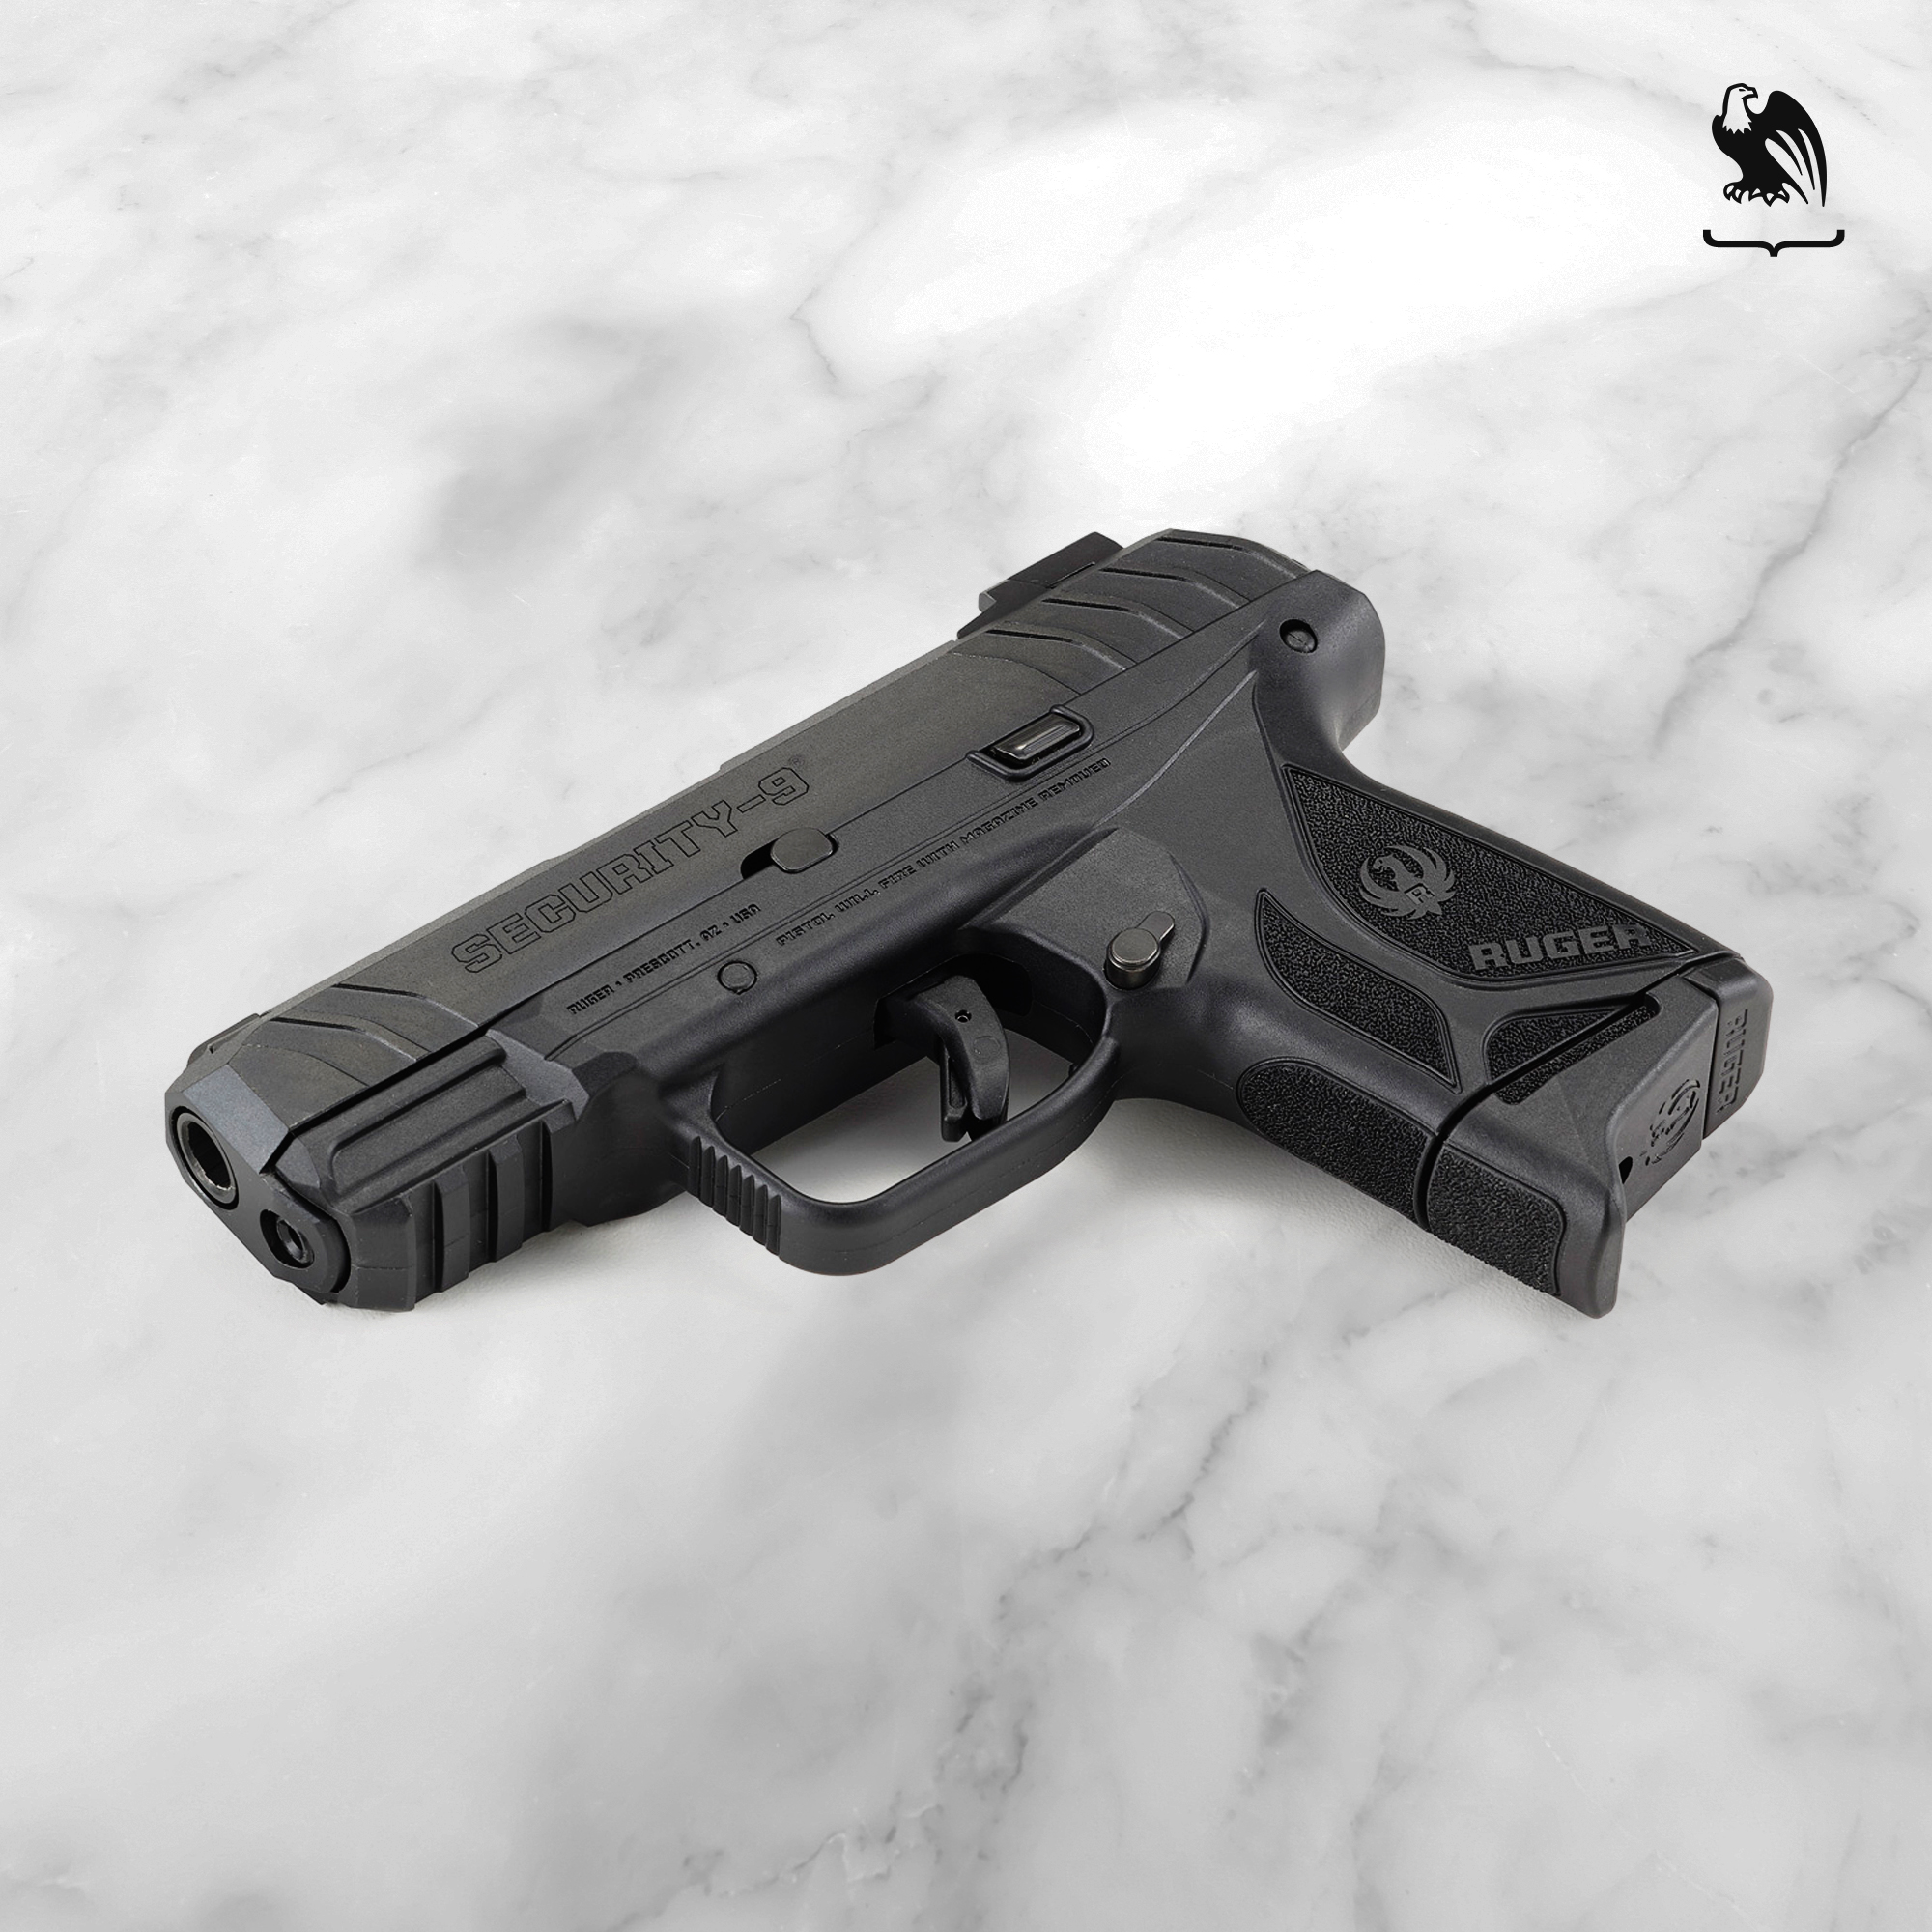 Ruger Security 9 Compact